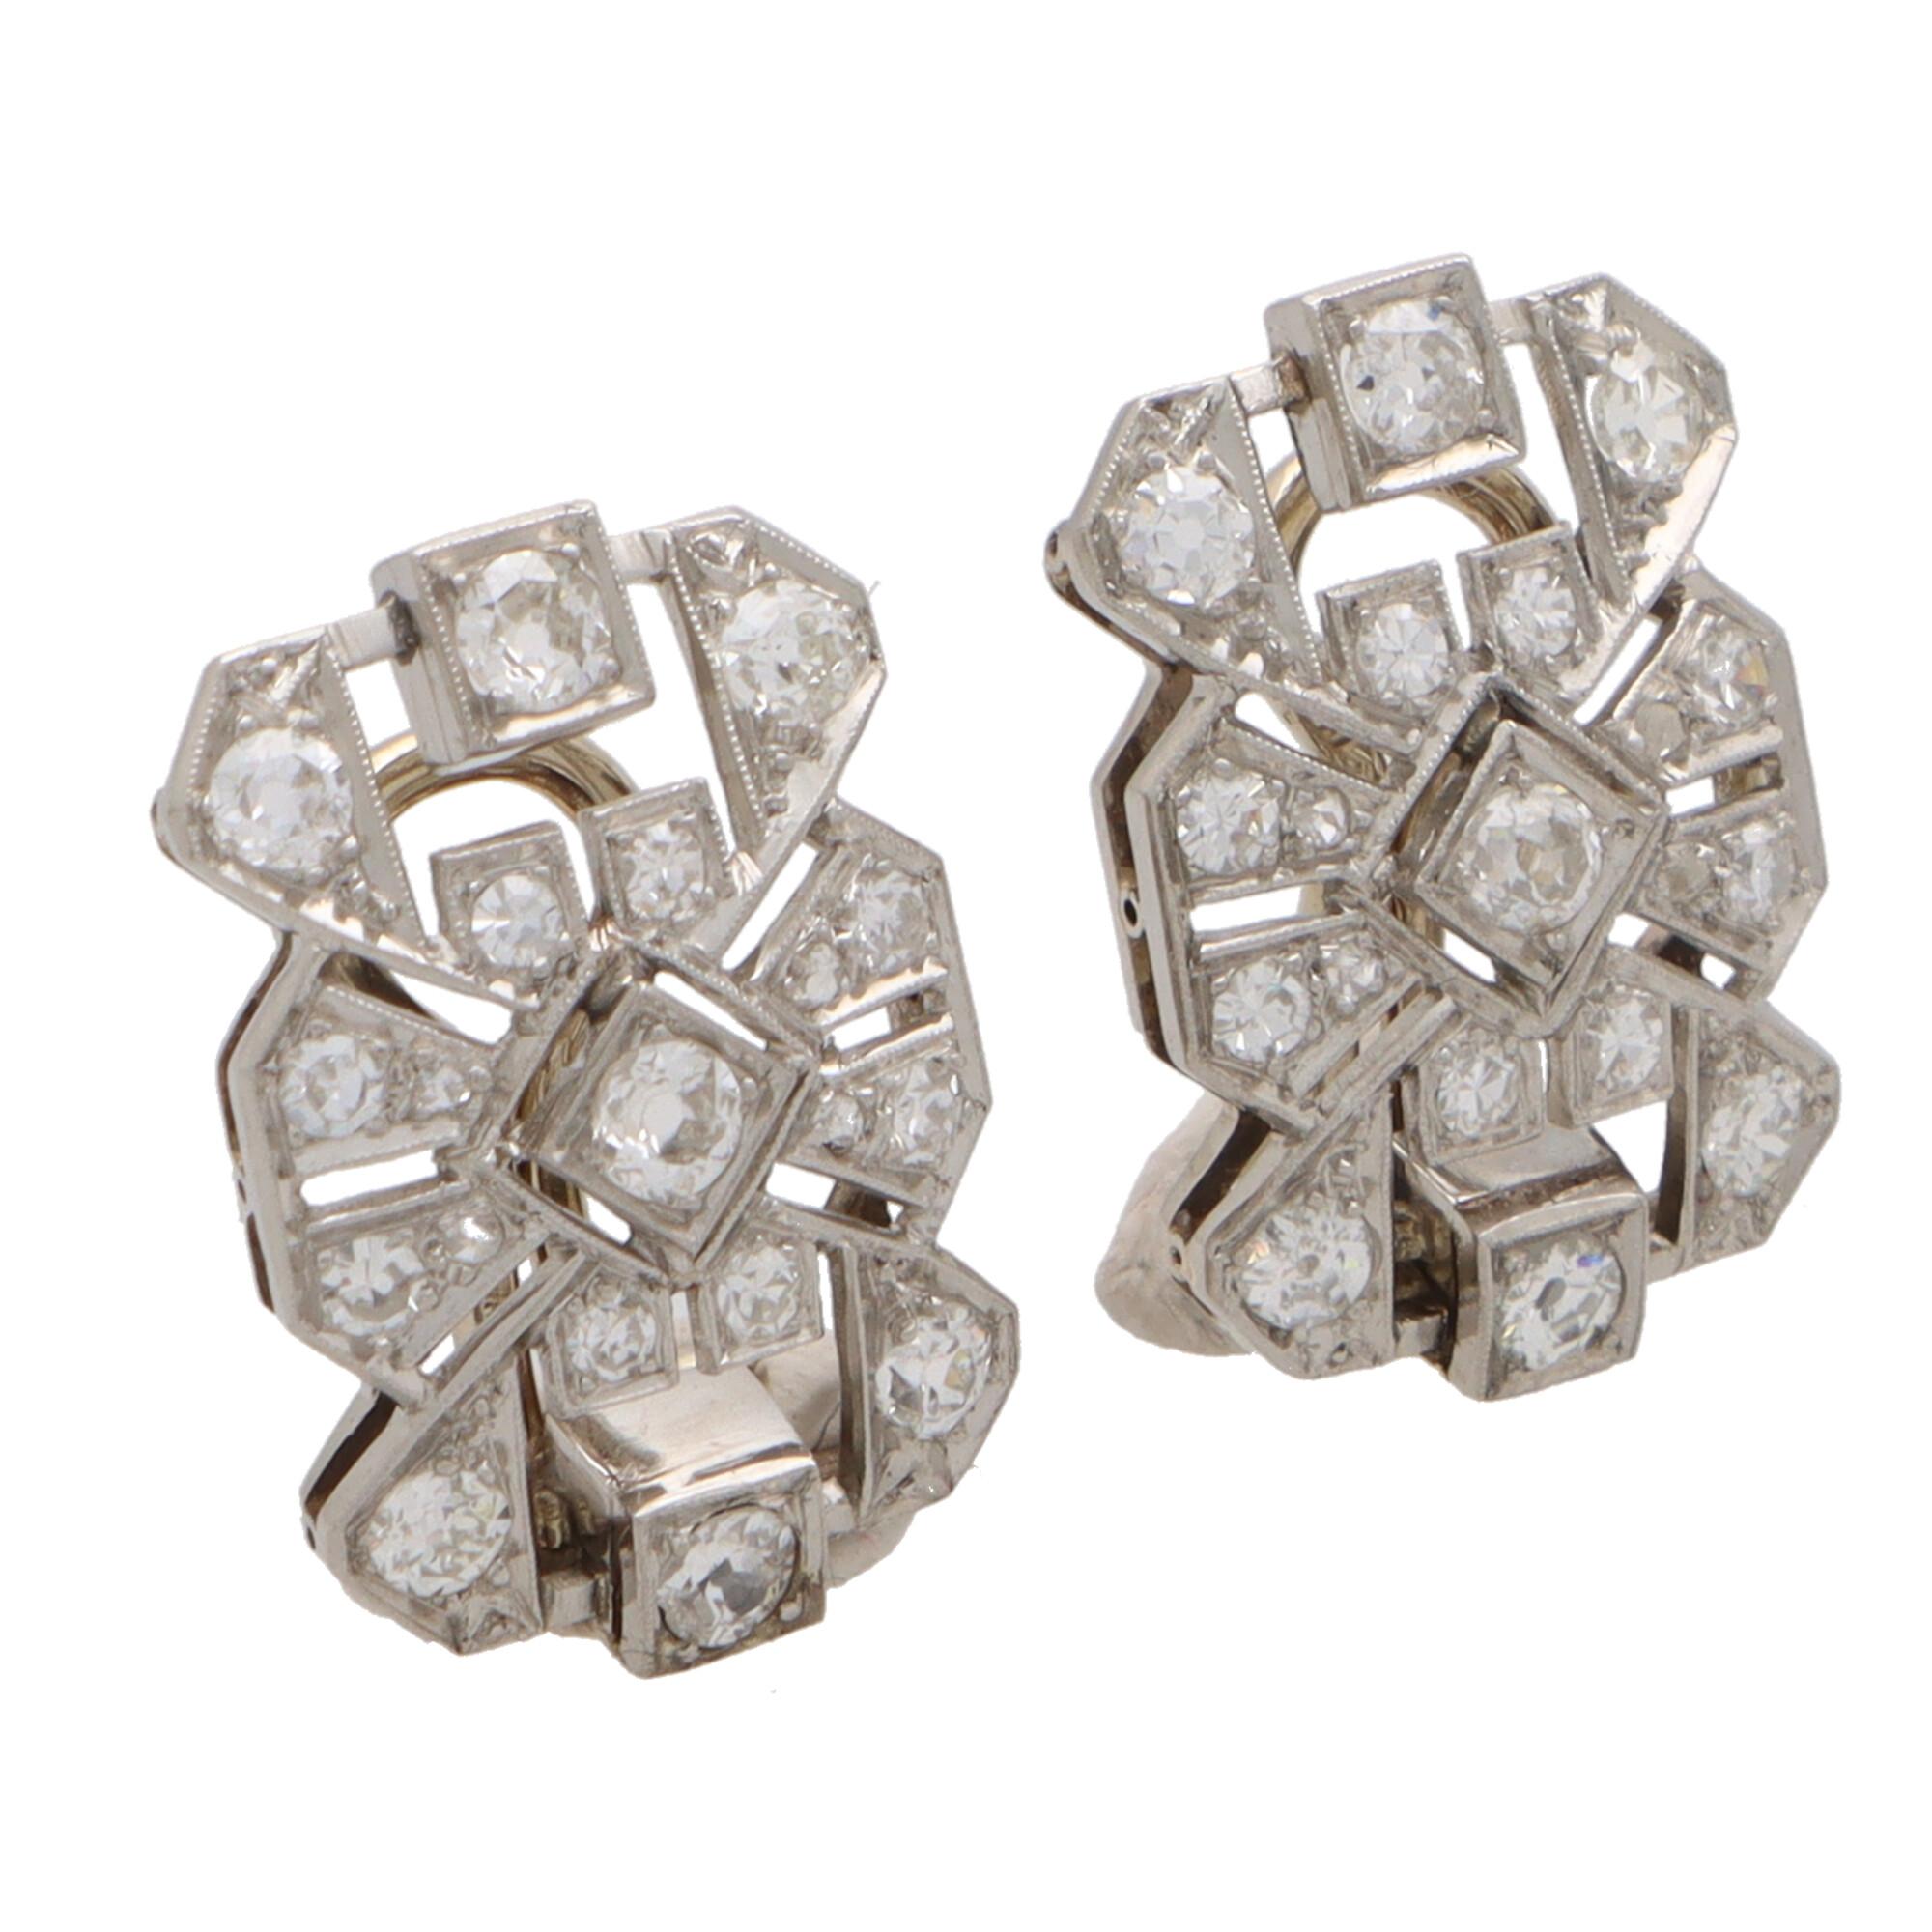 A beautiful pair of Late Art Deco diamond panel plaque earrings set in platinum and 18k white gold.

Each earring is designed as a pierced openwork panel grain-set with a mixture of old mine cut and transitional cut diamonds. The geometric motifs